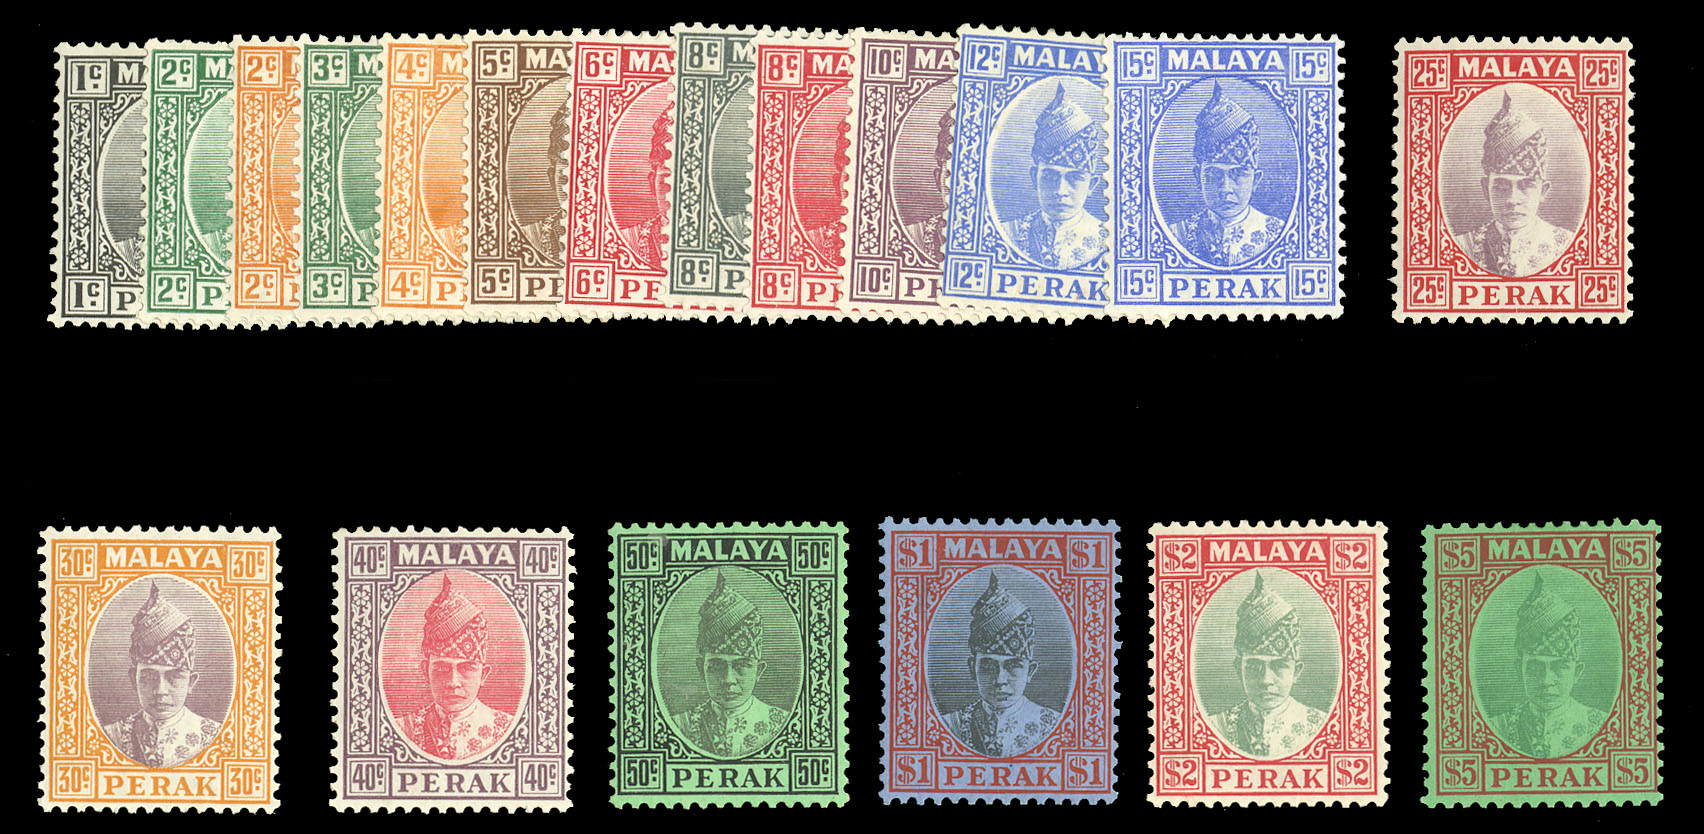 Lot 870 - ITALIAN COLONIES Fiume  -  Cherrystone Auctions U.S. & Worldwide Stamps & Postal History